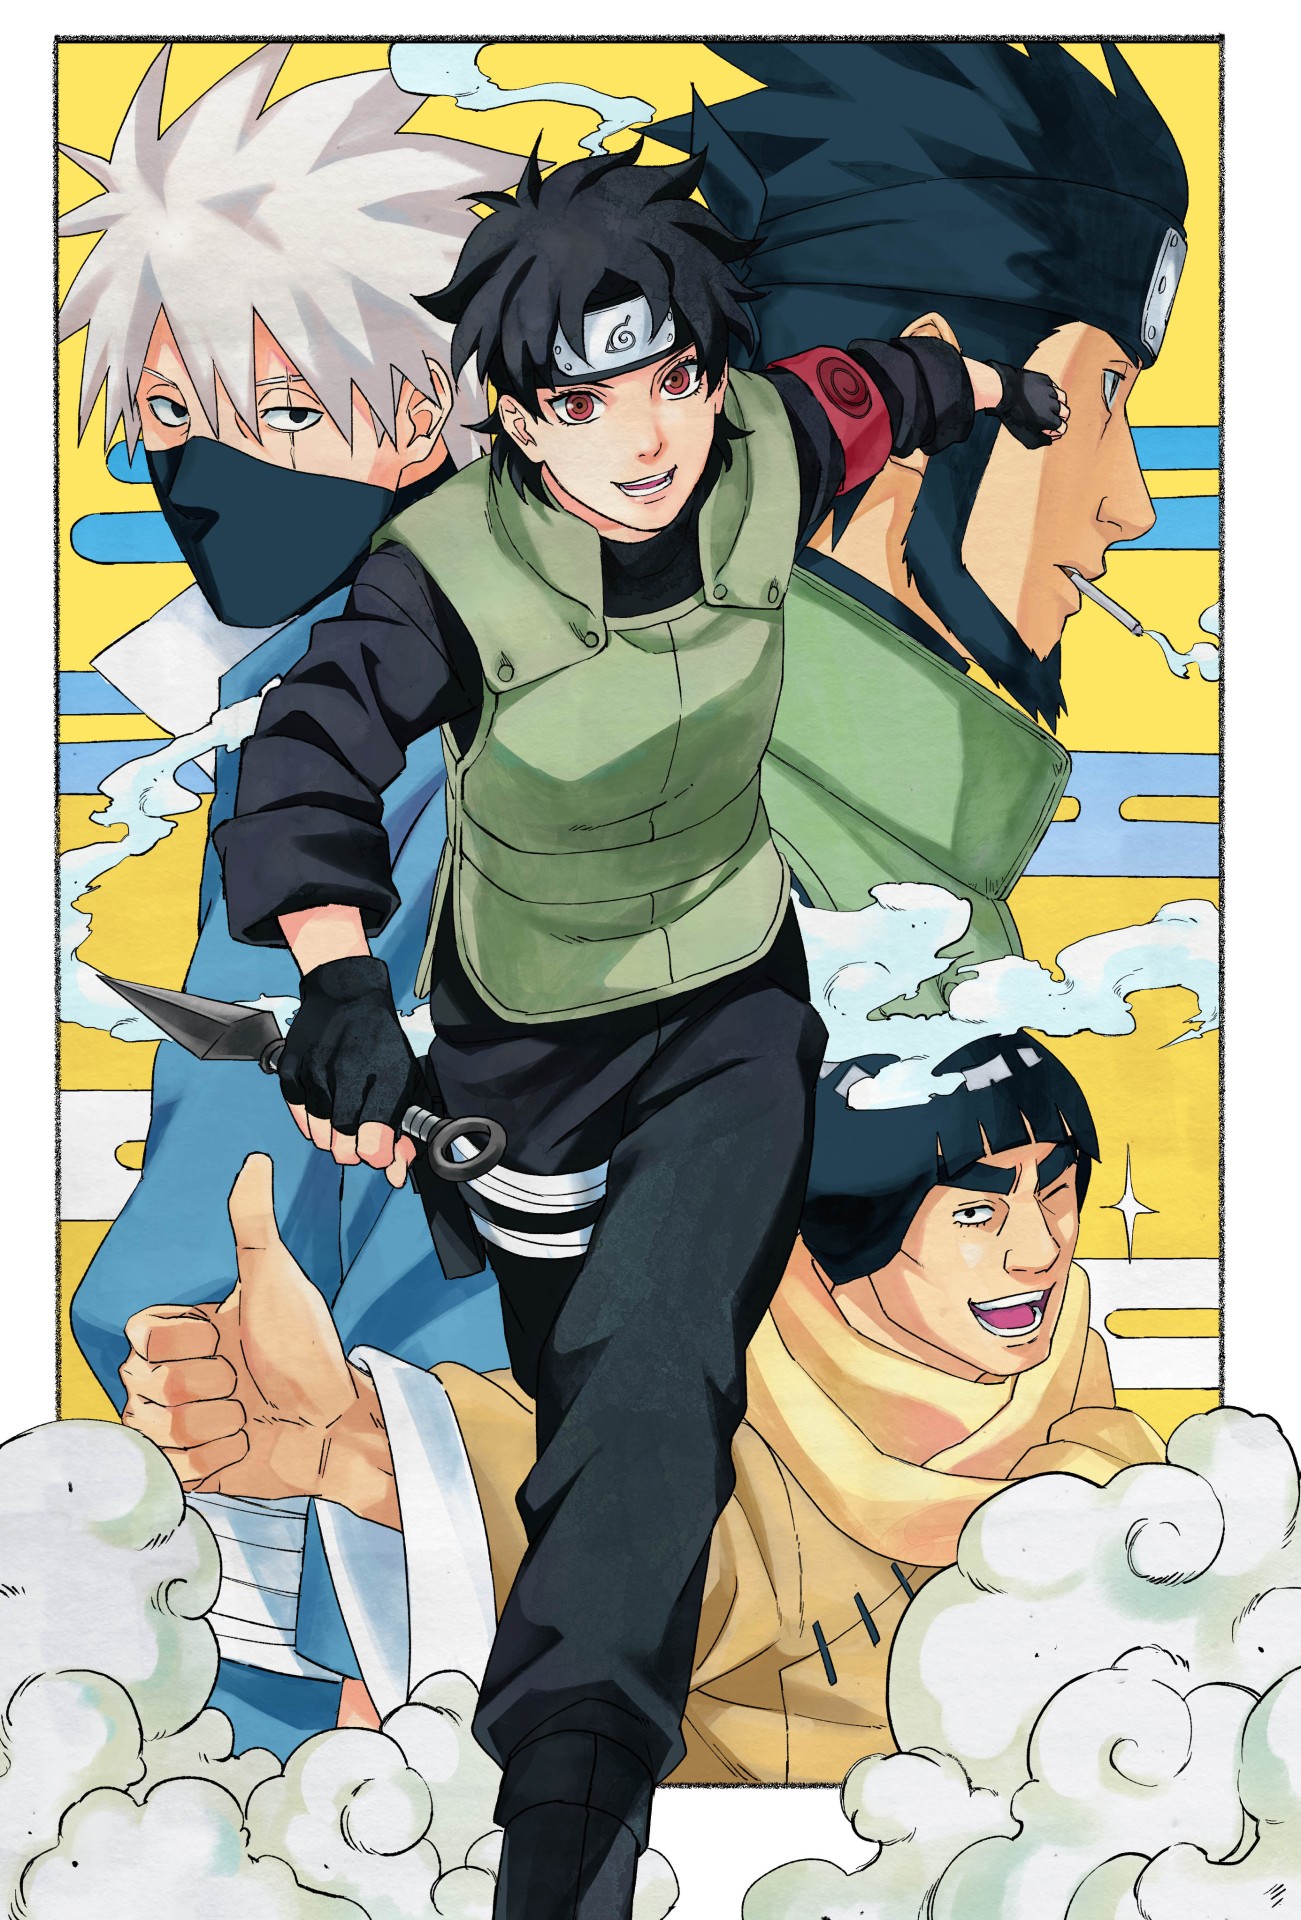 Naruto: 10 Differences Between The Anime And The Manga